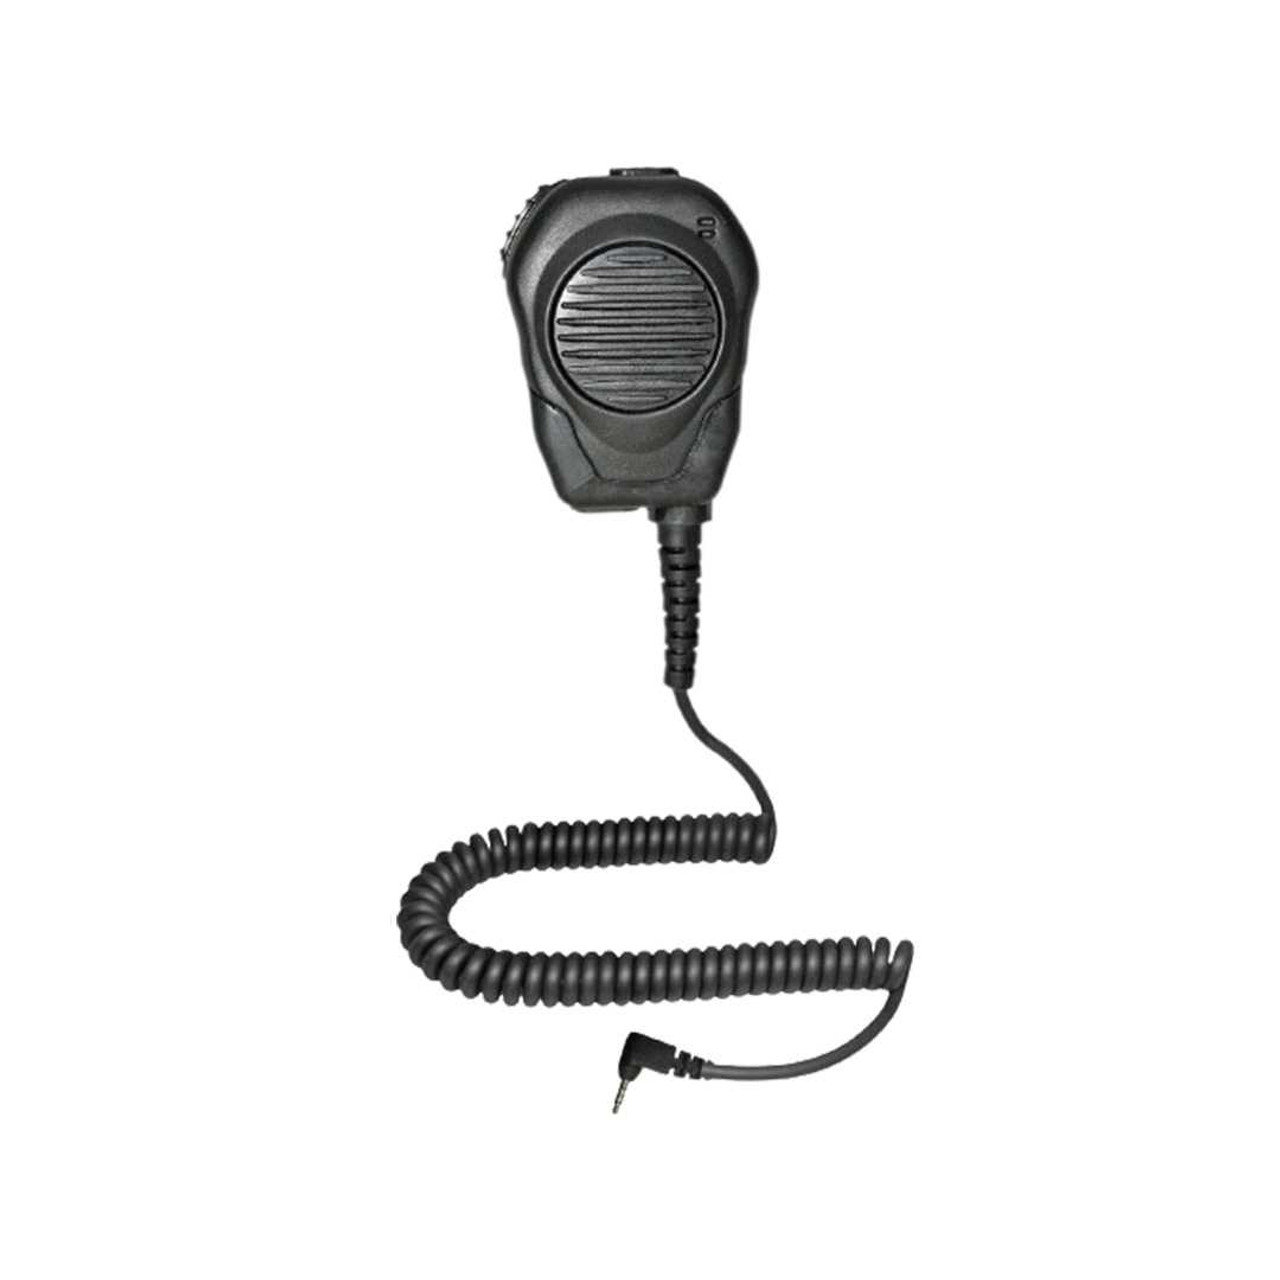 VALOR Speaker / Mic for 3.5mm Pin - Samsung [[product_type]] kleinelectronics.com 134.95